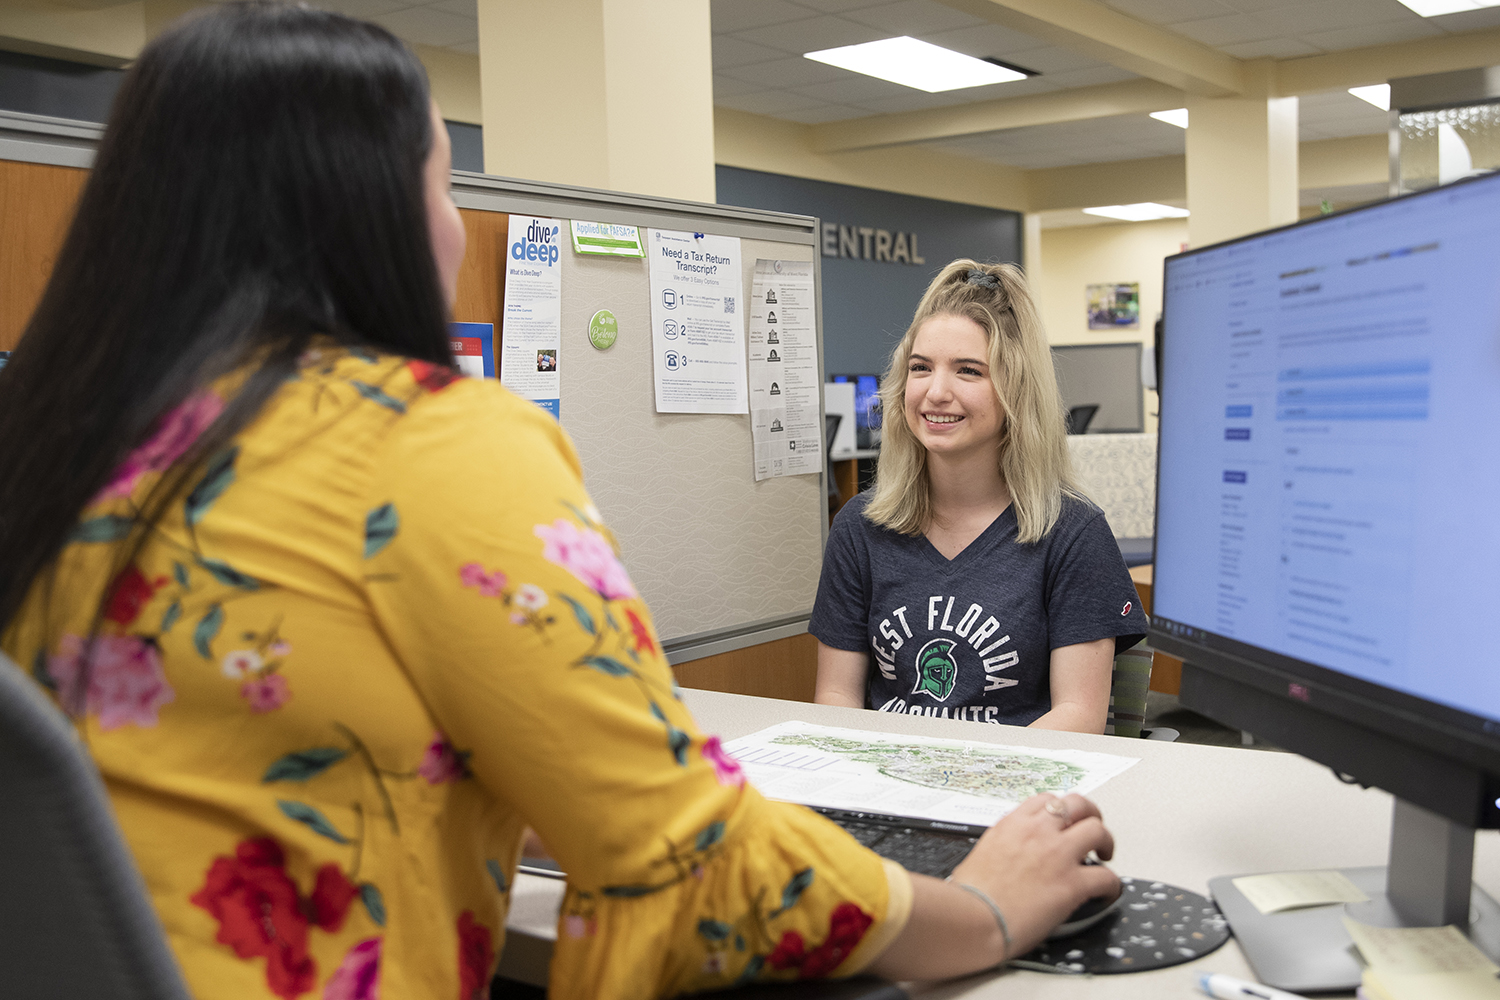 At UWF, the Admissions Office in Building 18 serves as "Point A" for a student's academic odessey as an Argonaut. At Admissions, students have resources such as financial advisors to help guide and plan their UWF experience.